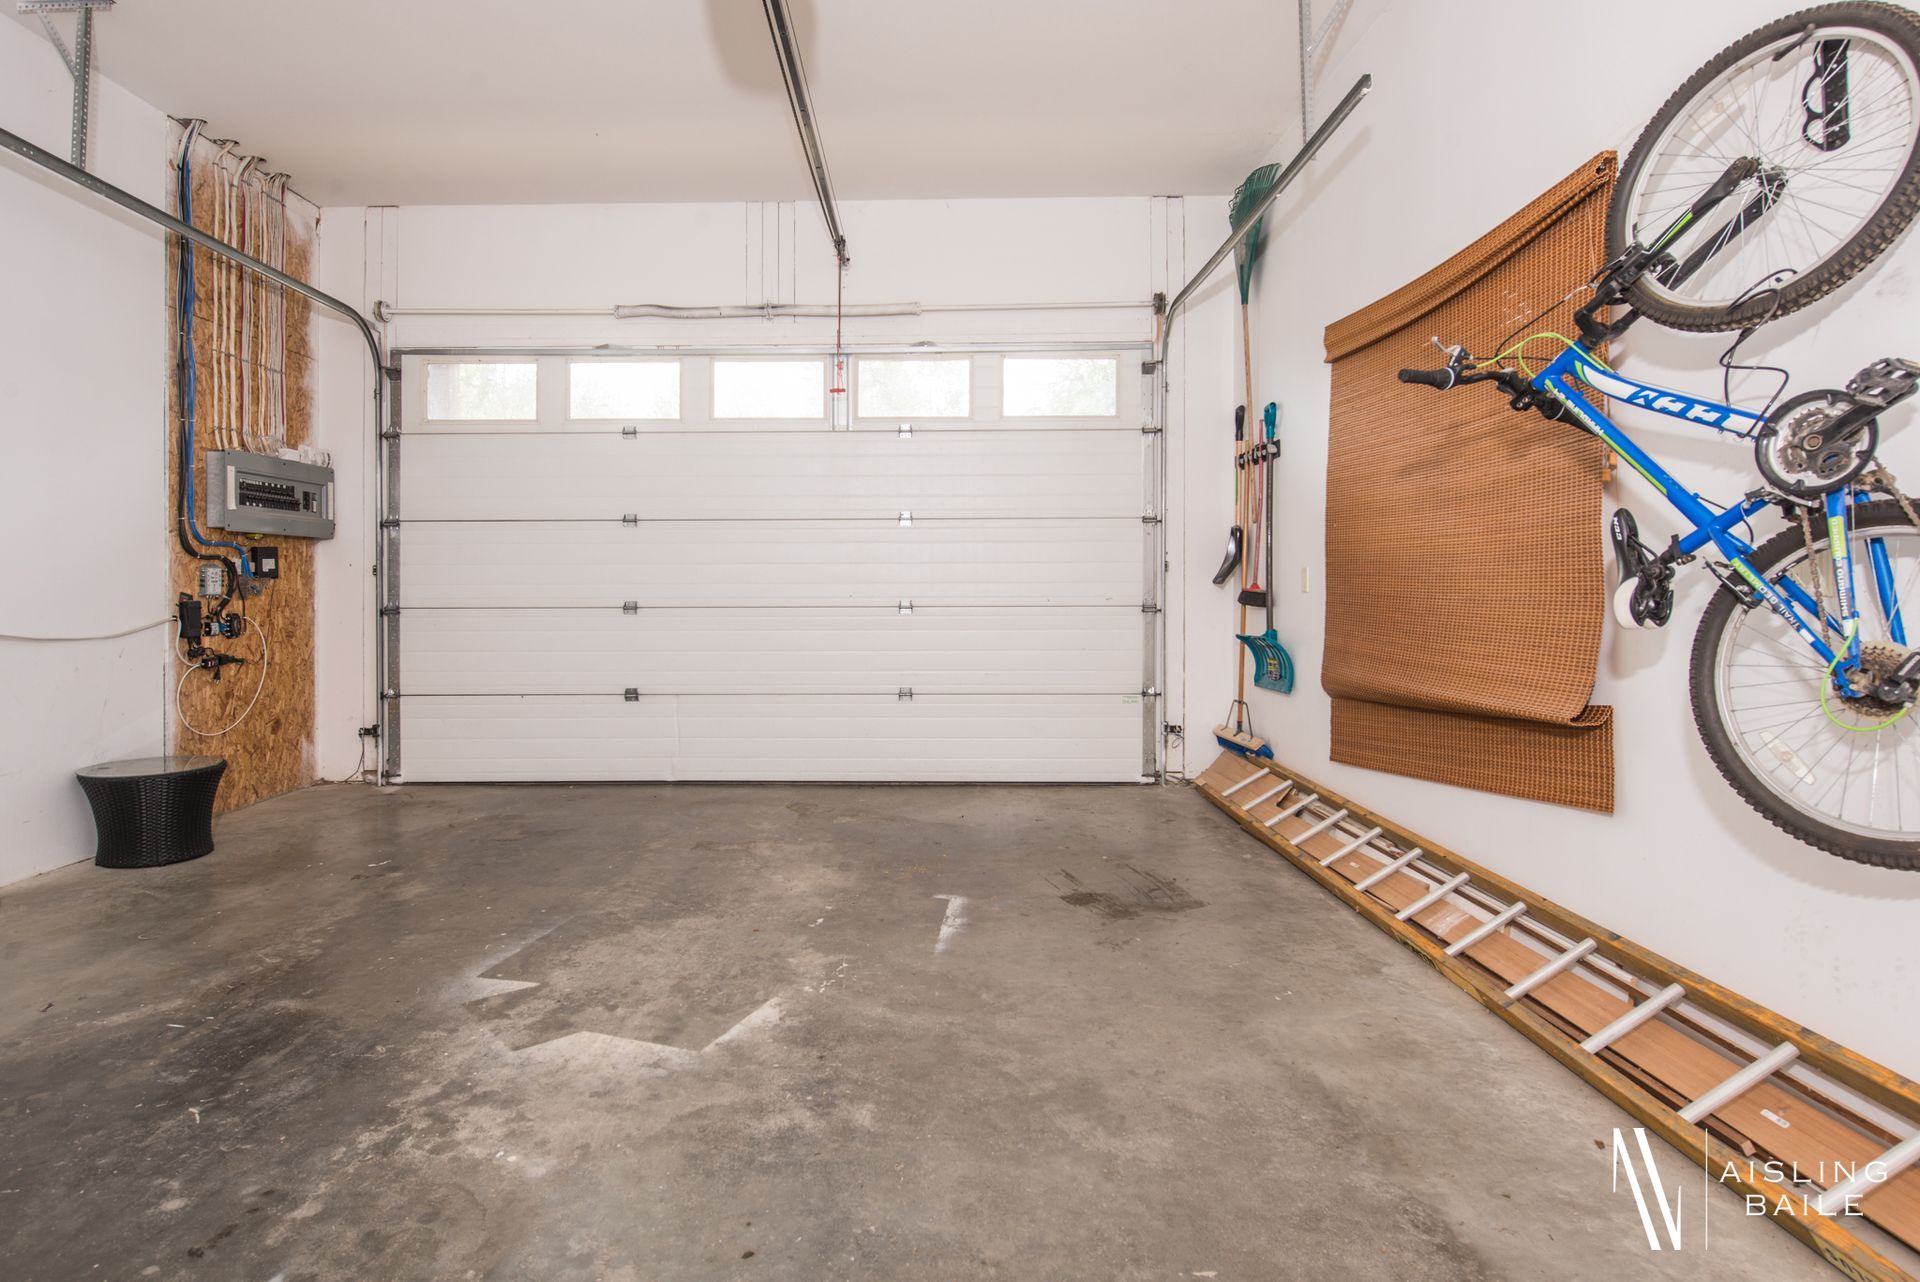 Double garage of the Central Elegance, an Invermere BC Vacation Rental hosted by Aisling Baile Property Management.